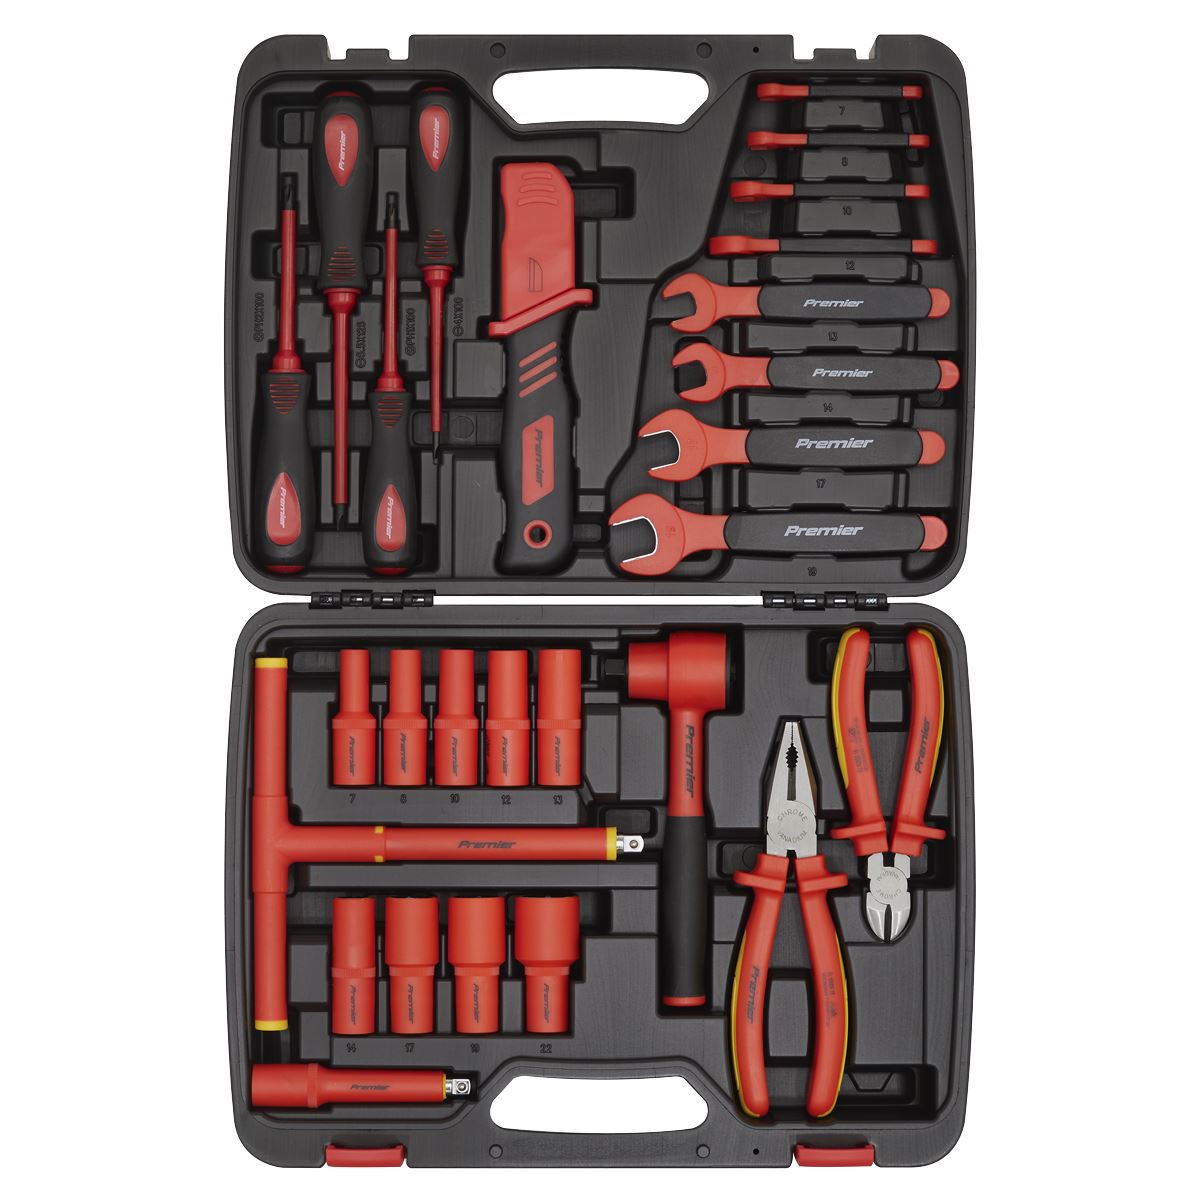 Sealey Premier 1000V Insulated Tool Kit 27pc - VDE Approved